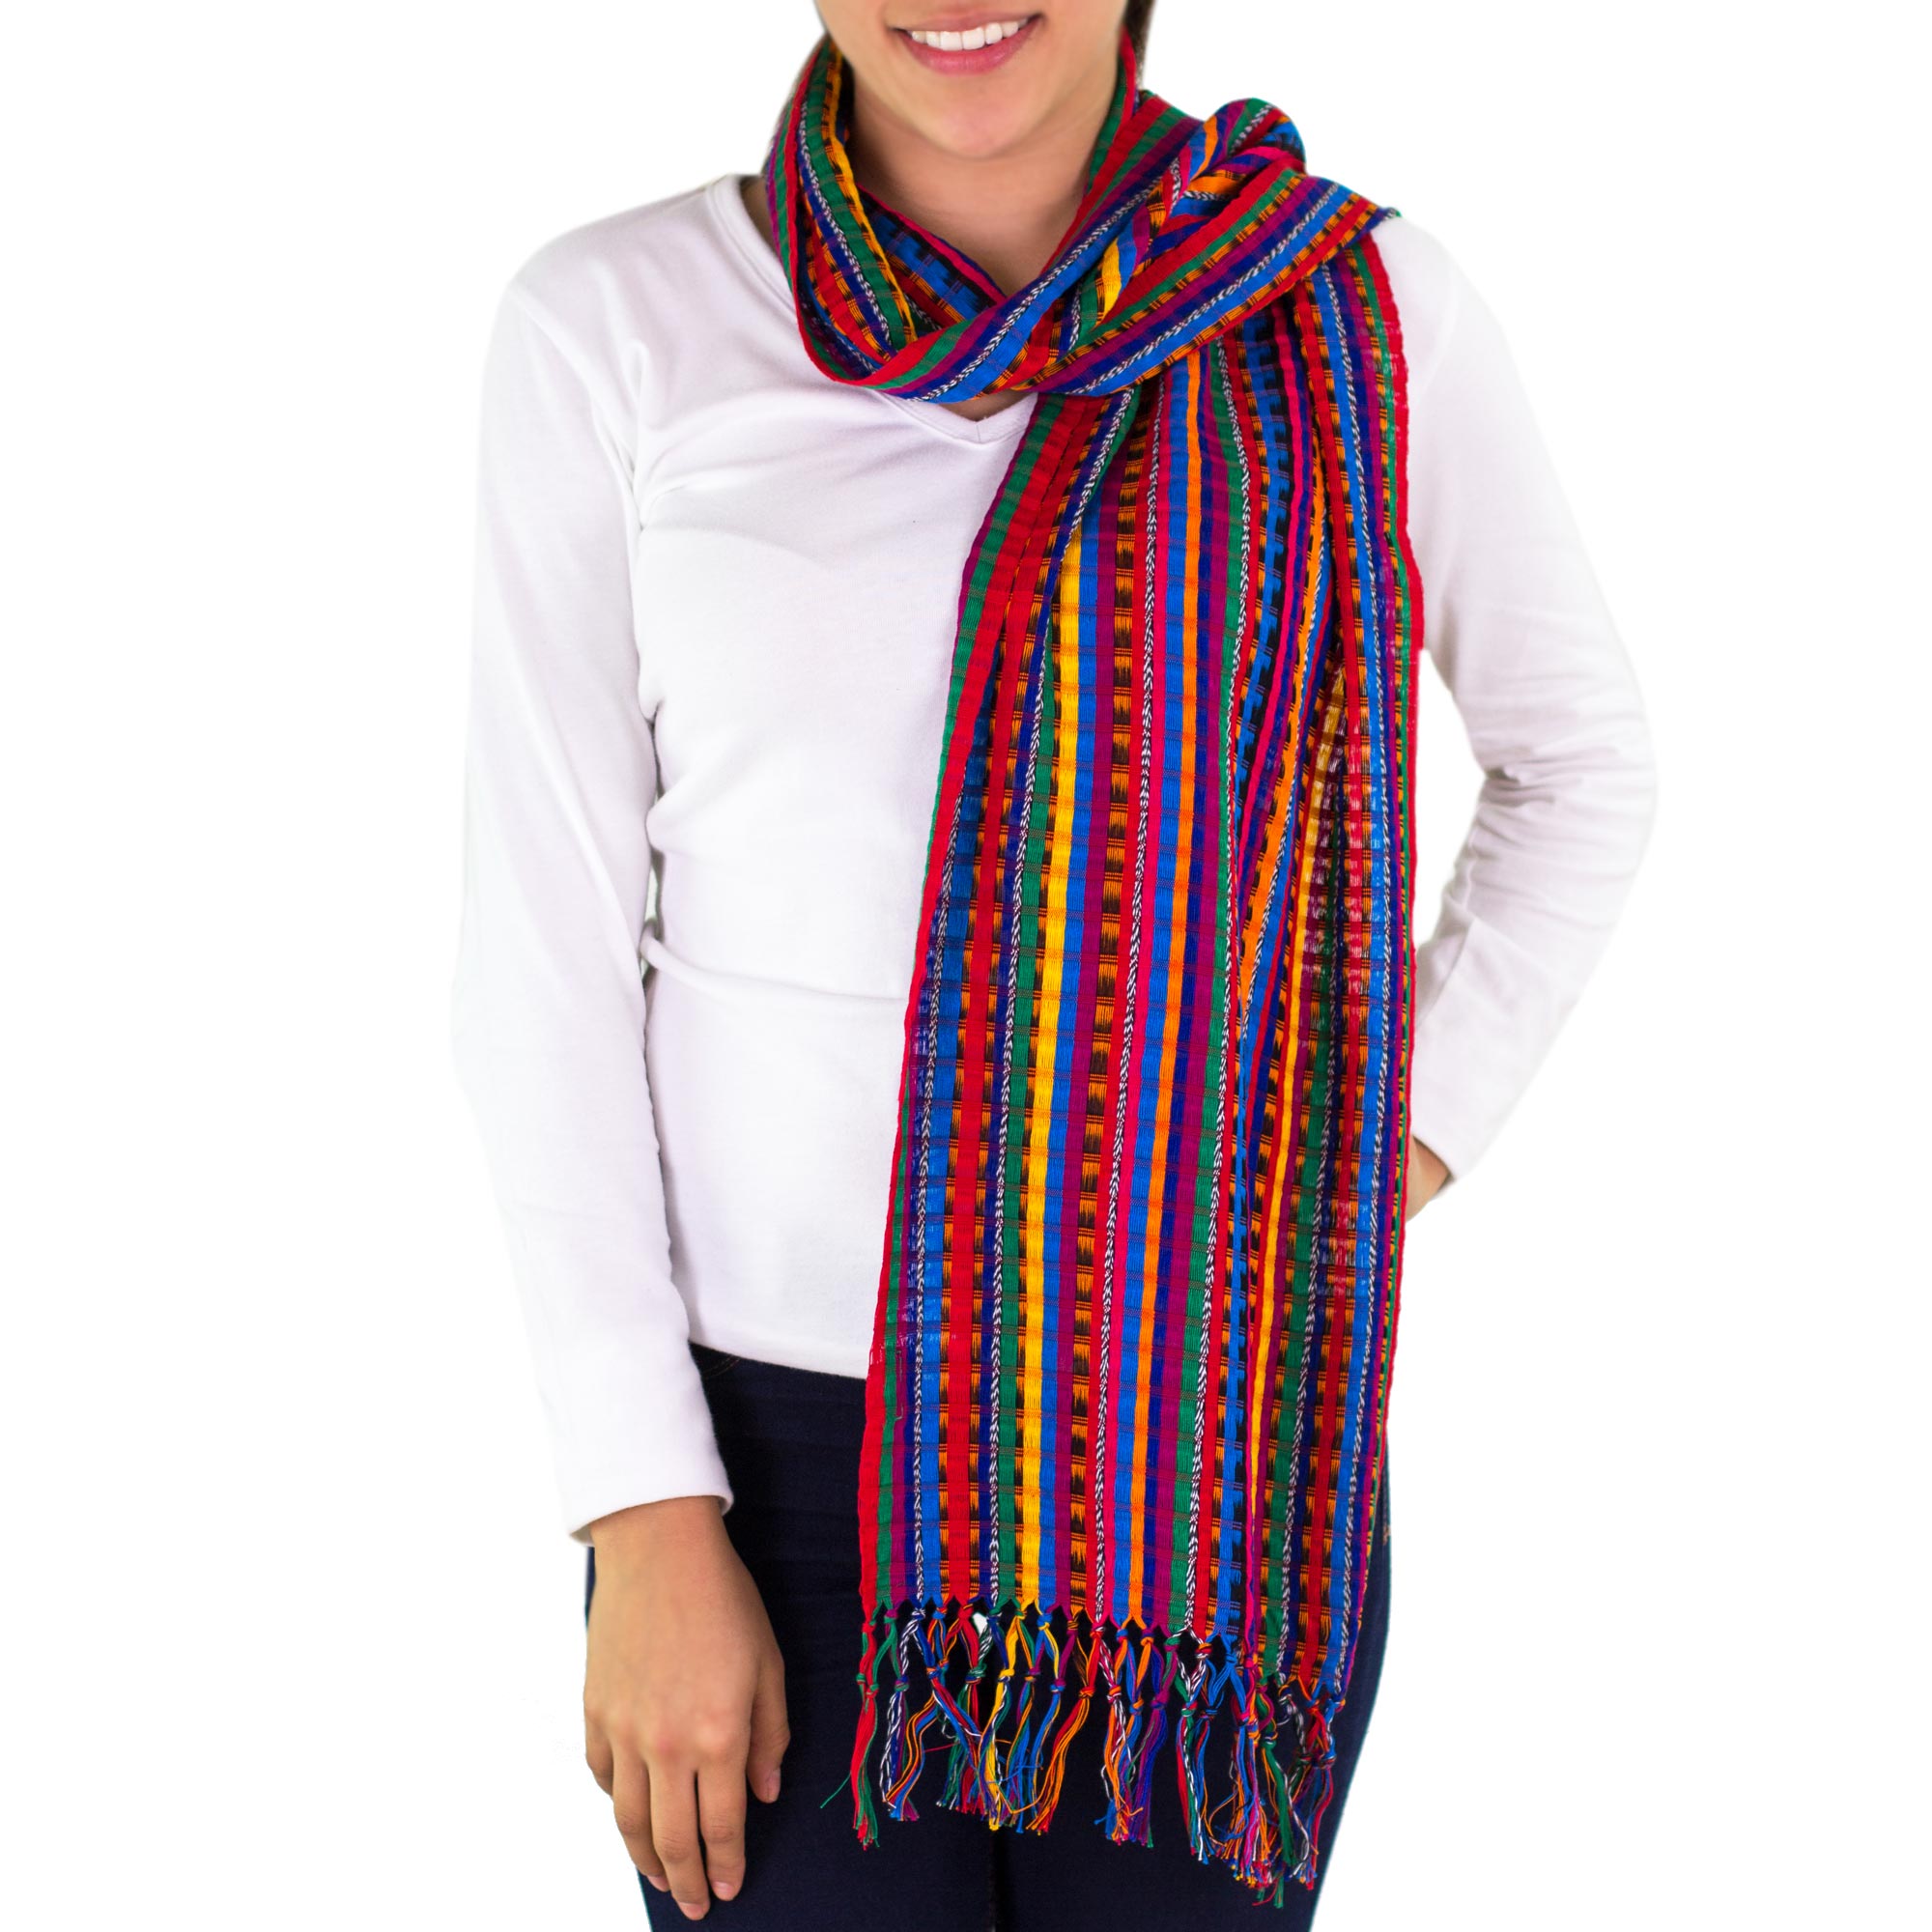 Guatemalan Hand Woven Cotton Scarf in Primary Colors, 'Valley of Flowers'